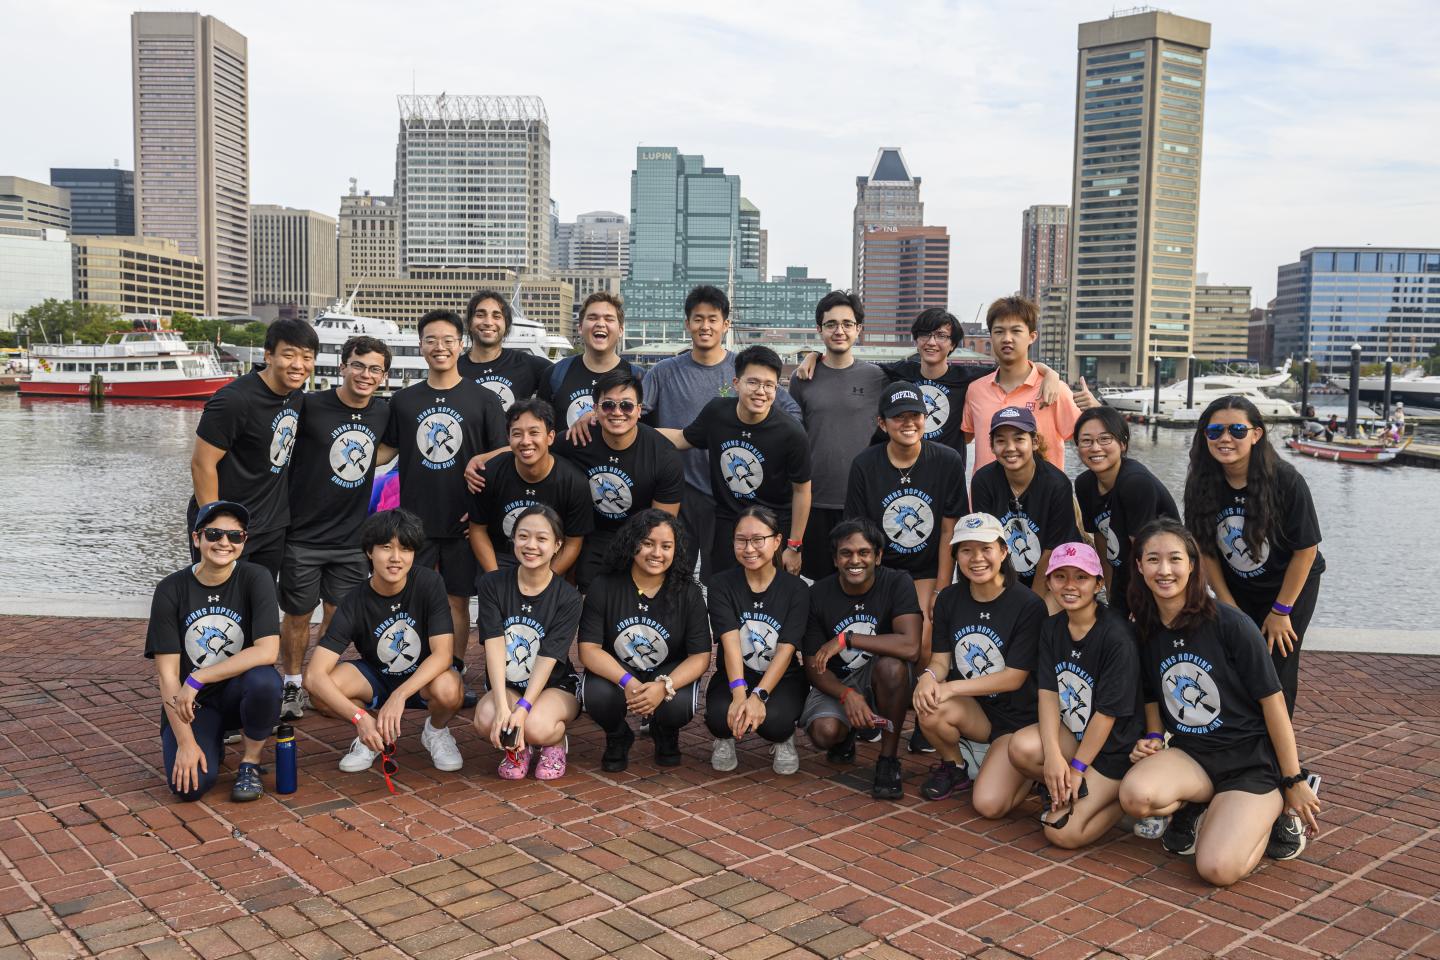 The JHU Dragon Boat Team smiles for a picture in front of Baltimore's Inner Harbor